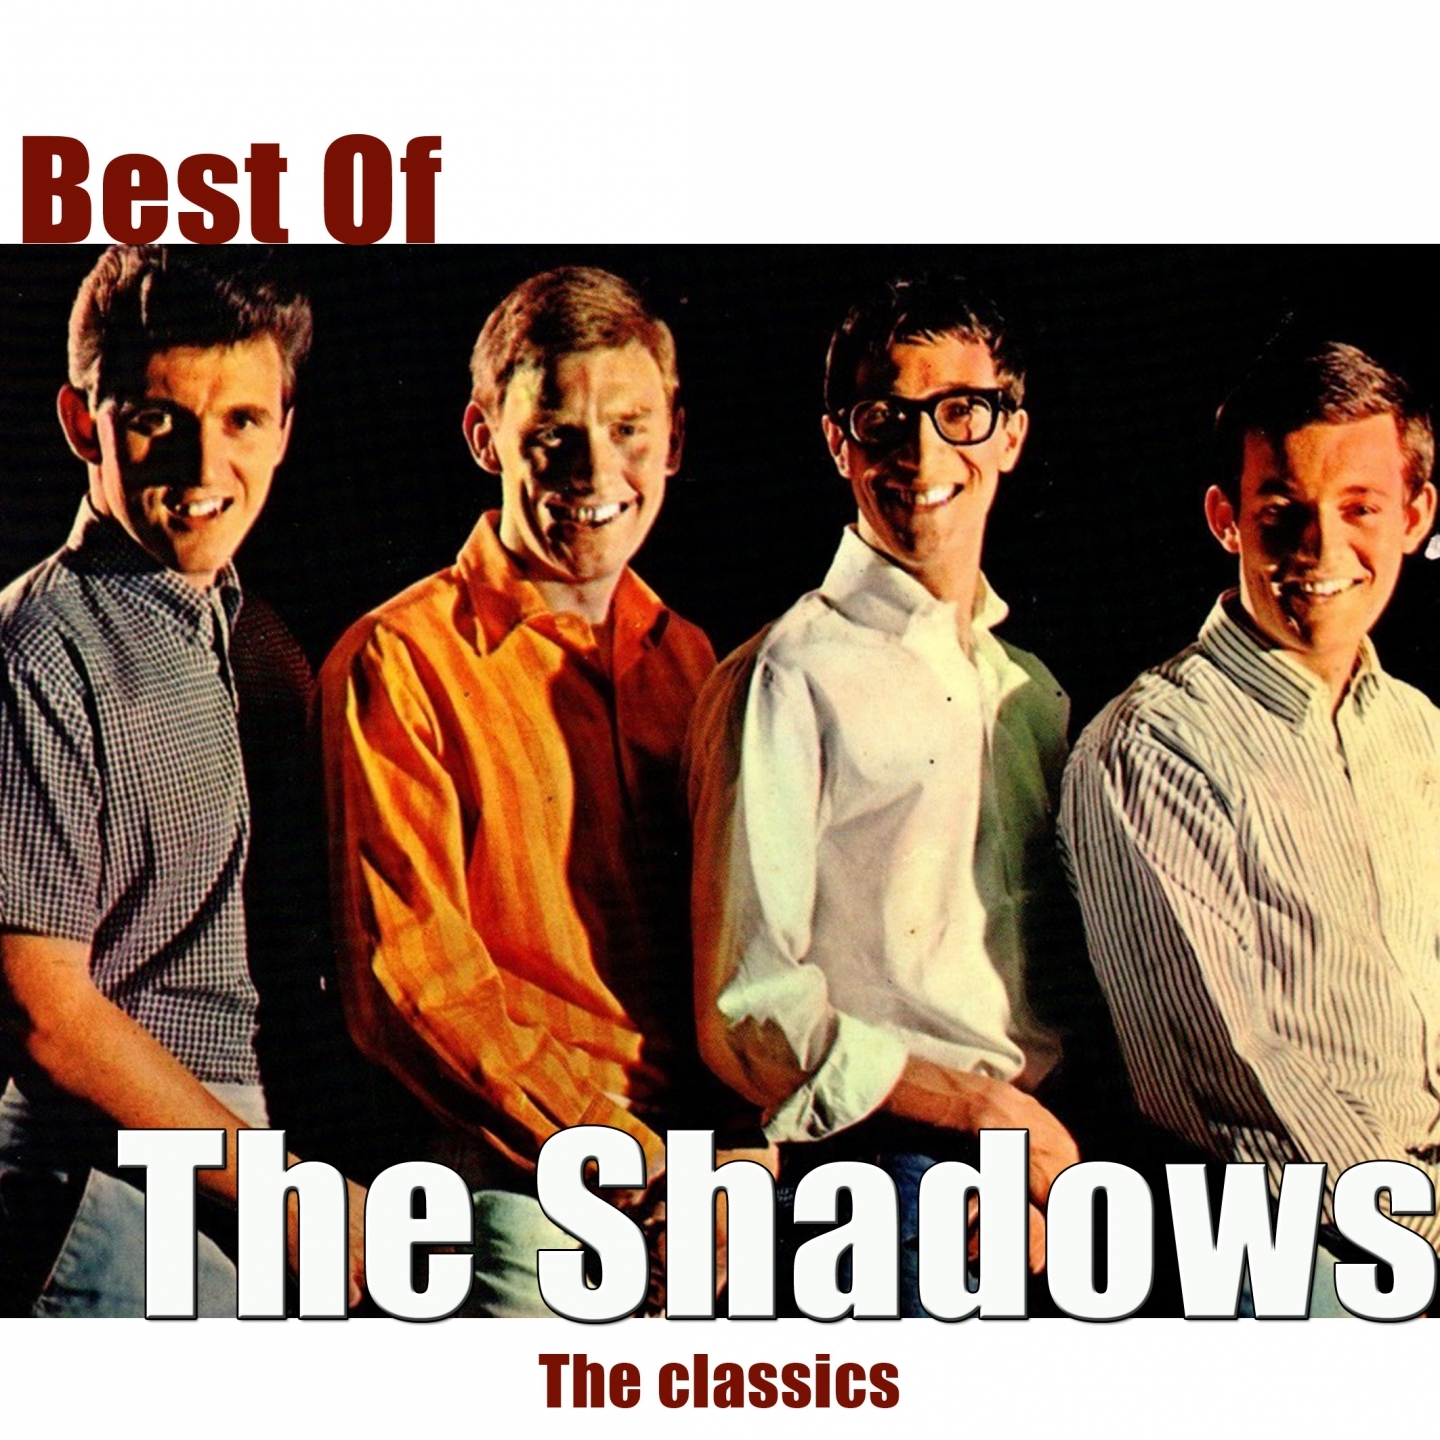 Best of The Shadows (The Classics)